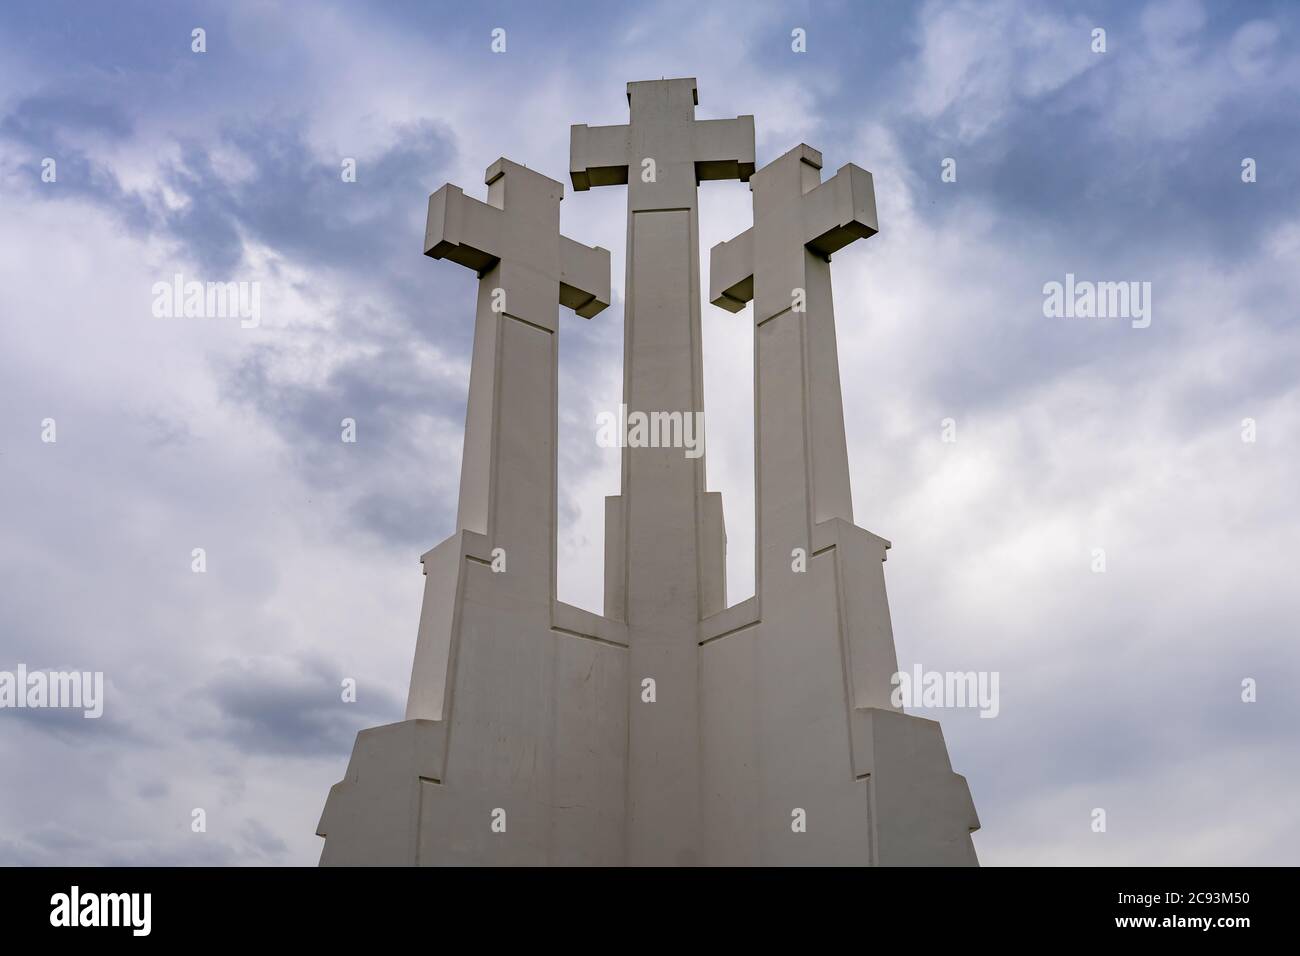 Three Crosses, a prominent monument in Vilnius, Lithuania, on the Bald Hill in Kalnai Park. According to a legend, seven Franciscan friars were behead Stock Photo